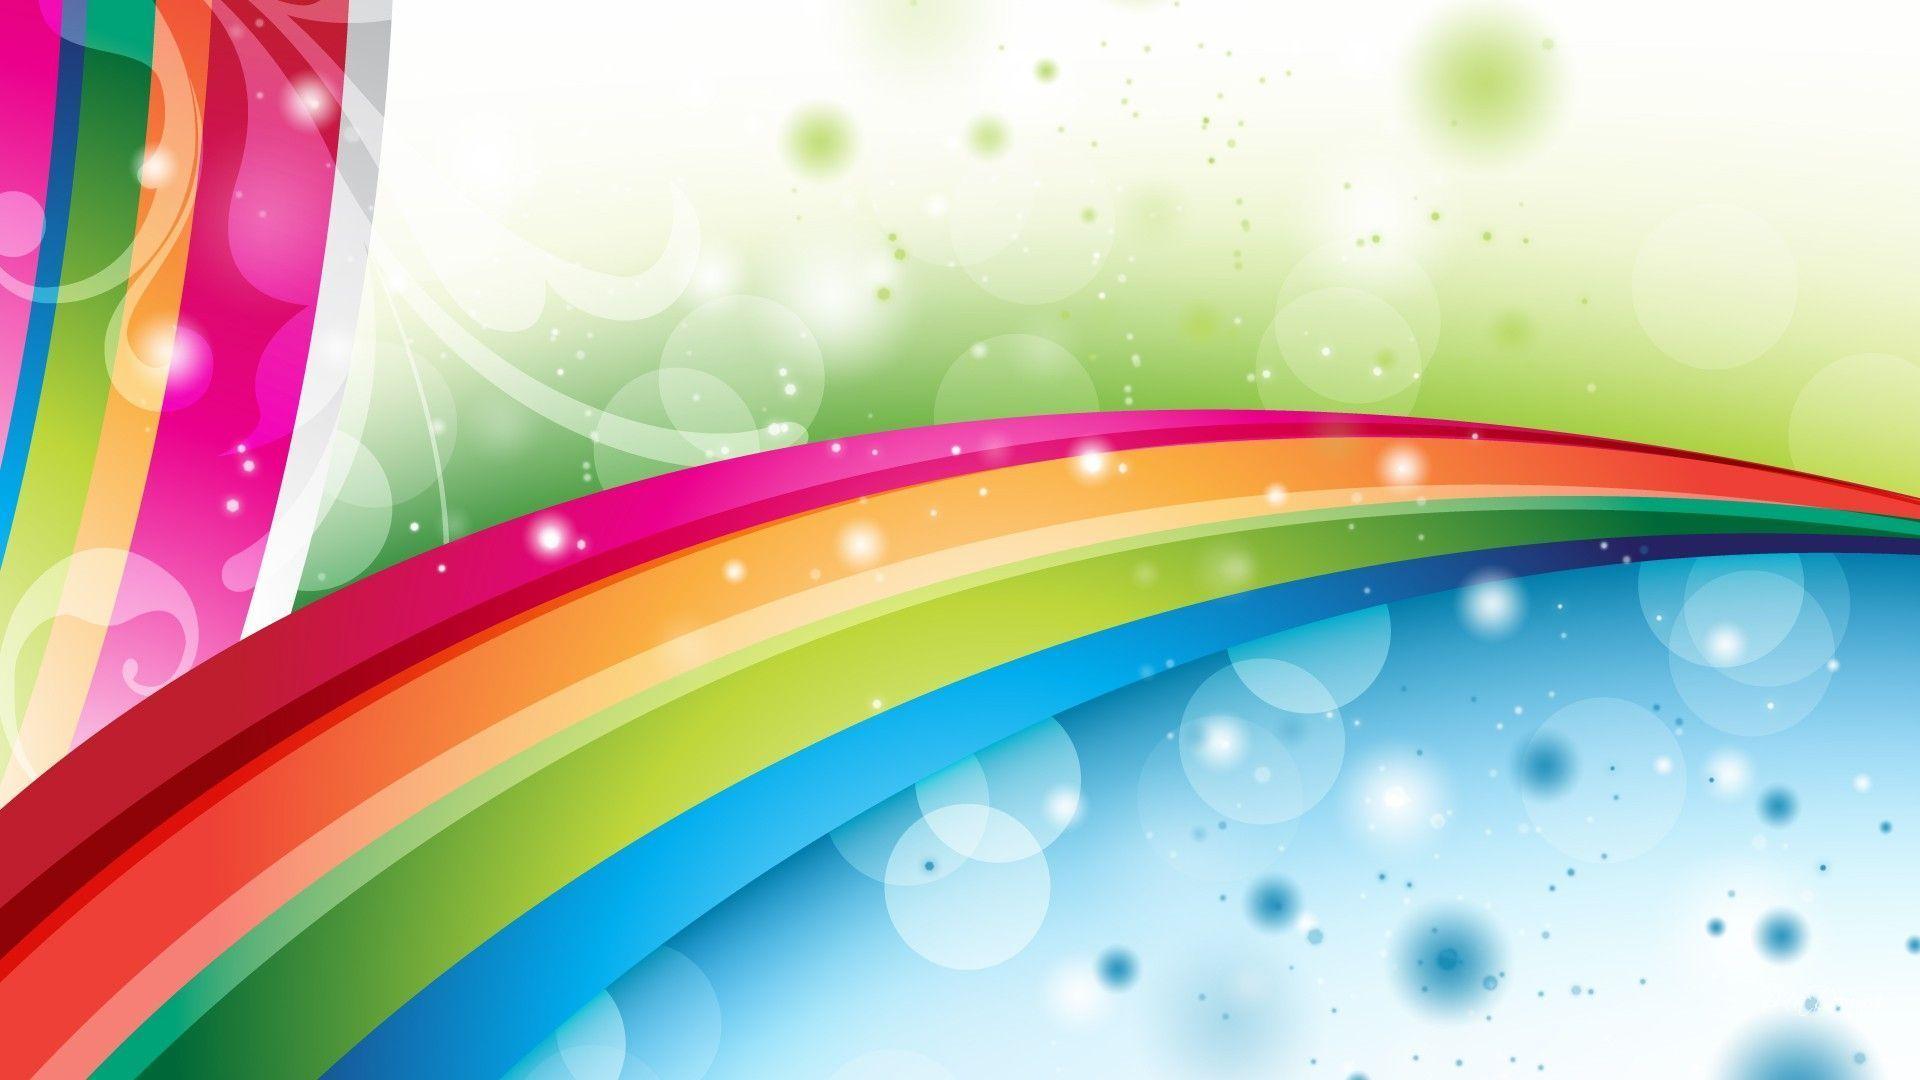 Widescreen Space In Rainbow Colors Dash Abstract Wallpaper, HQ